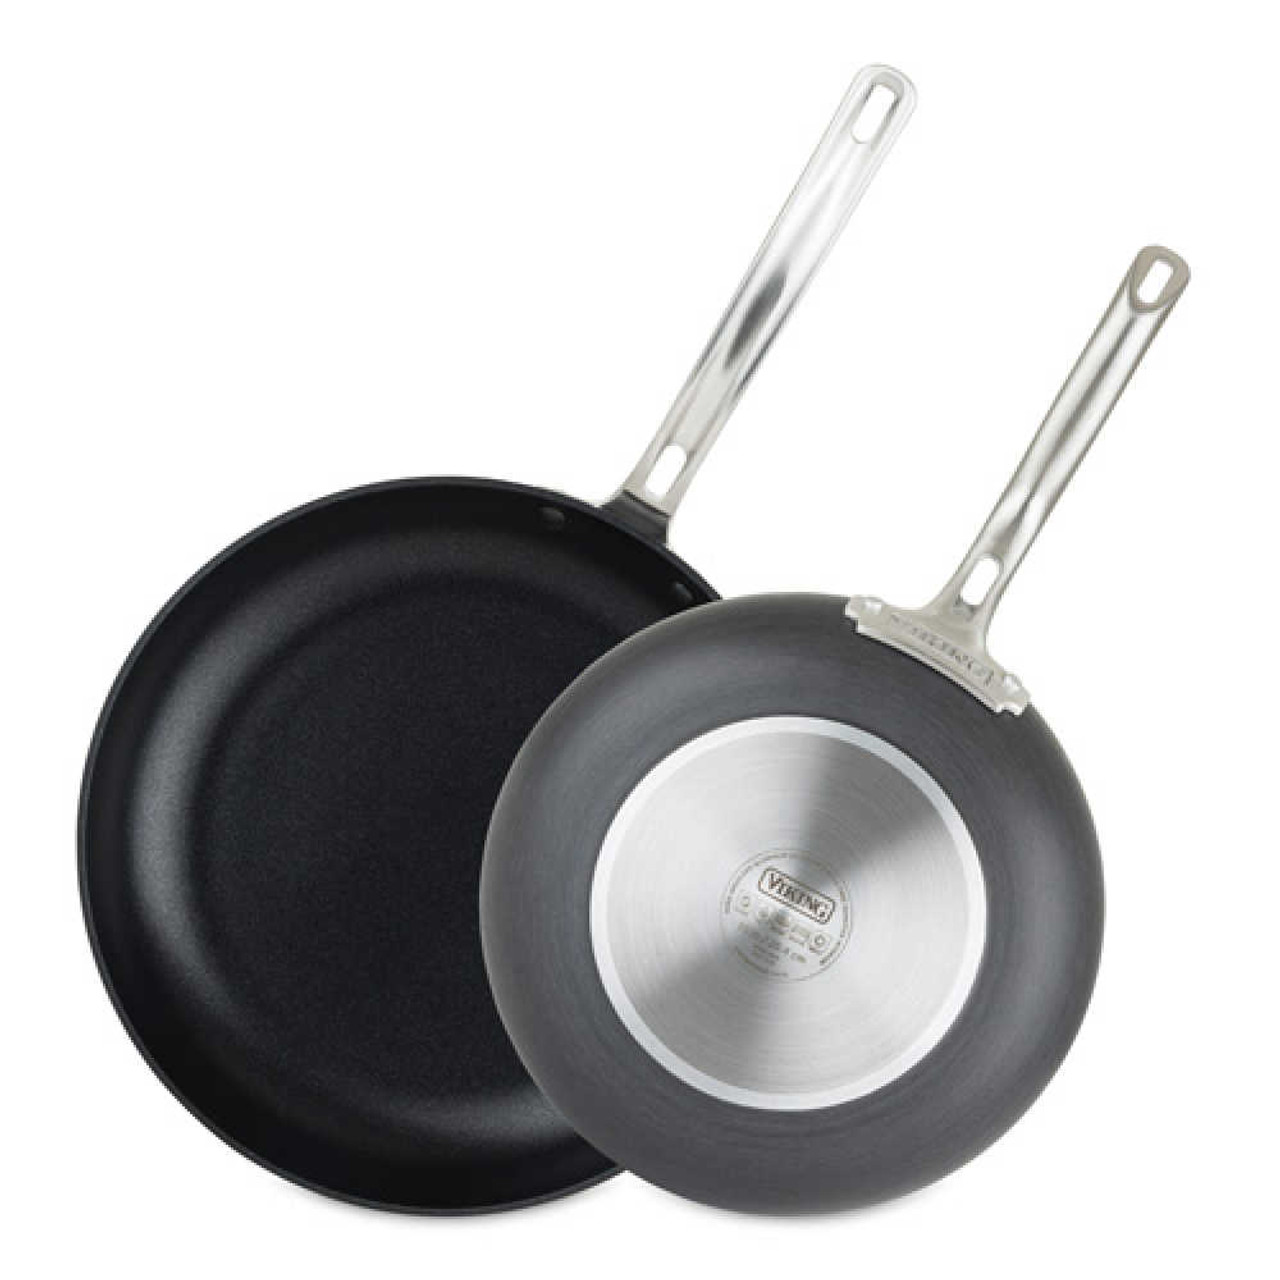 Nordic Ware Nonstick Searing Grill Pan - Fante's Kitchen Shop